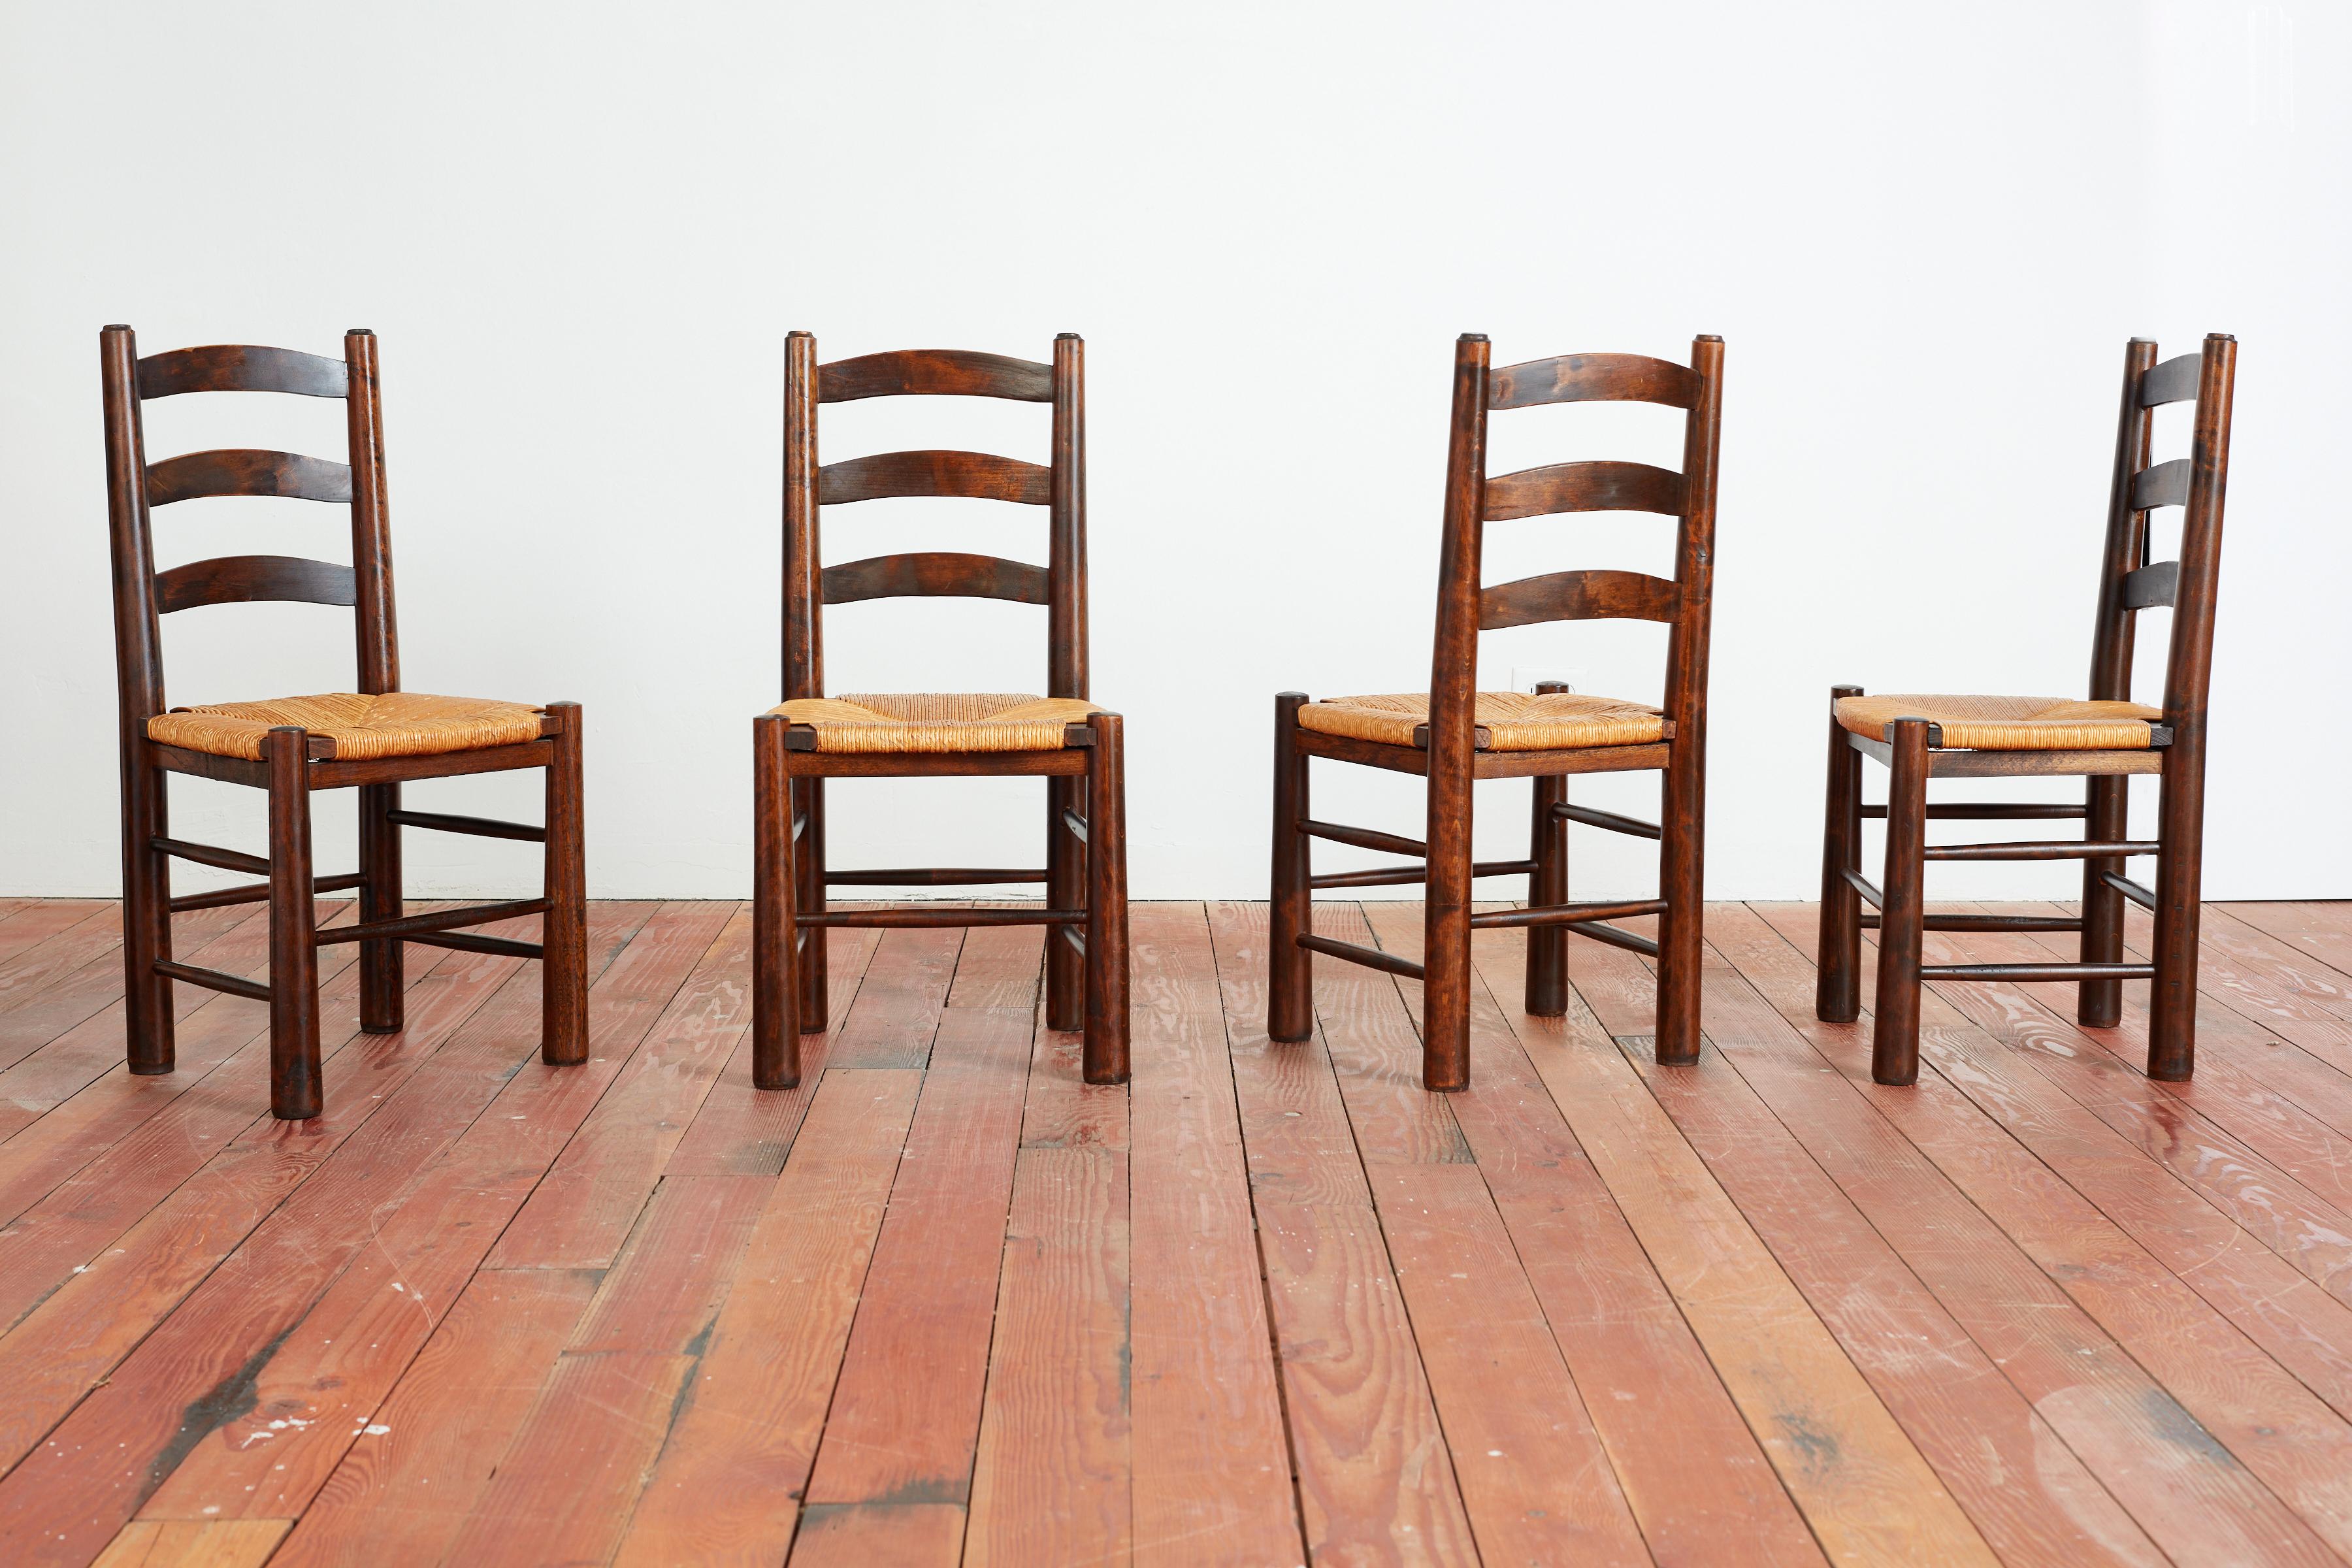 Dining room chairs in the style of Charlotte Perriand with ladder backs and woven straw seats.
Nice dark wood stain with wonderful patina
Priced as a set of 4 